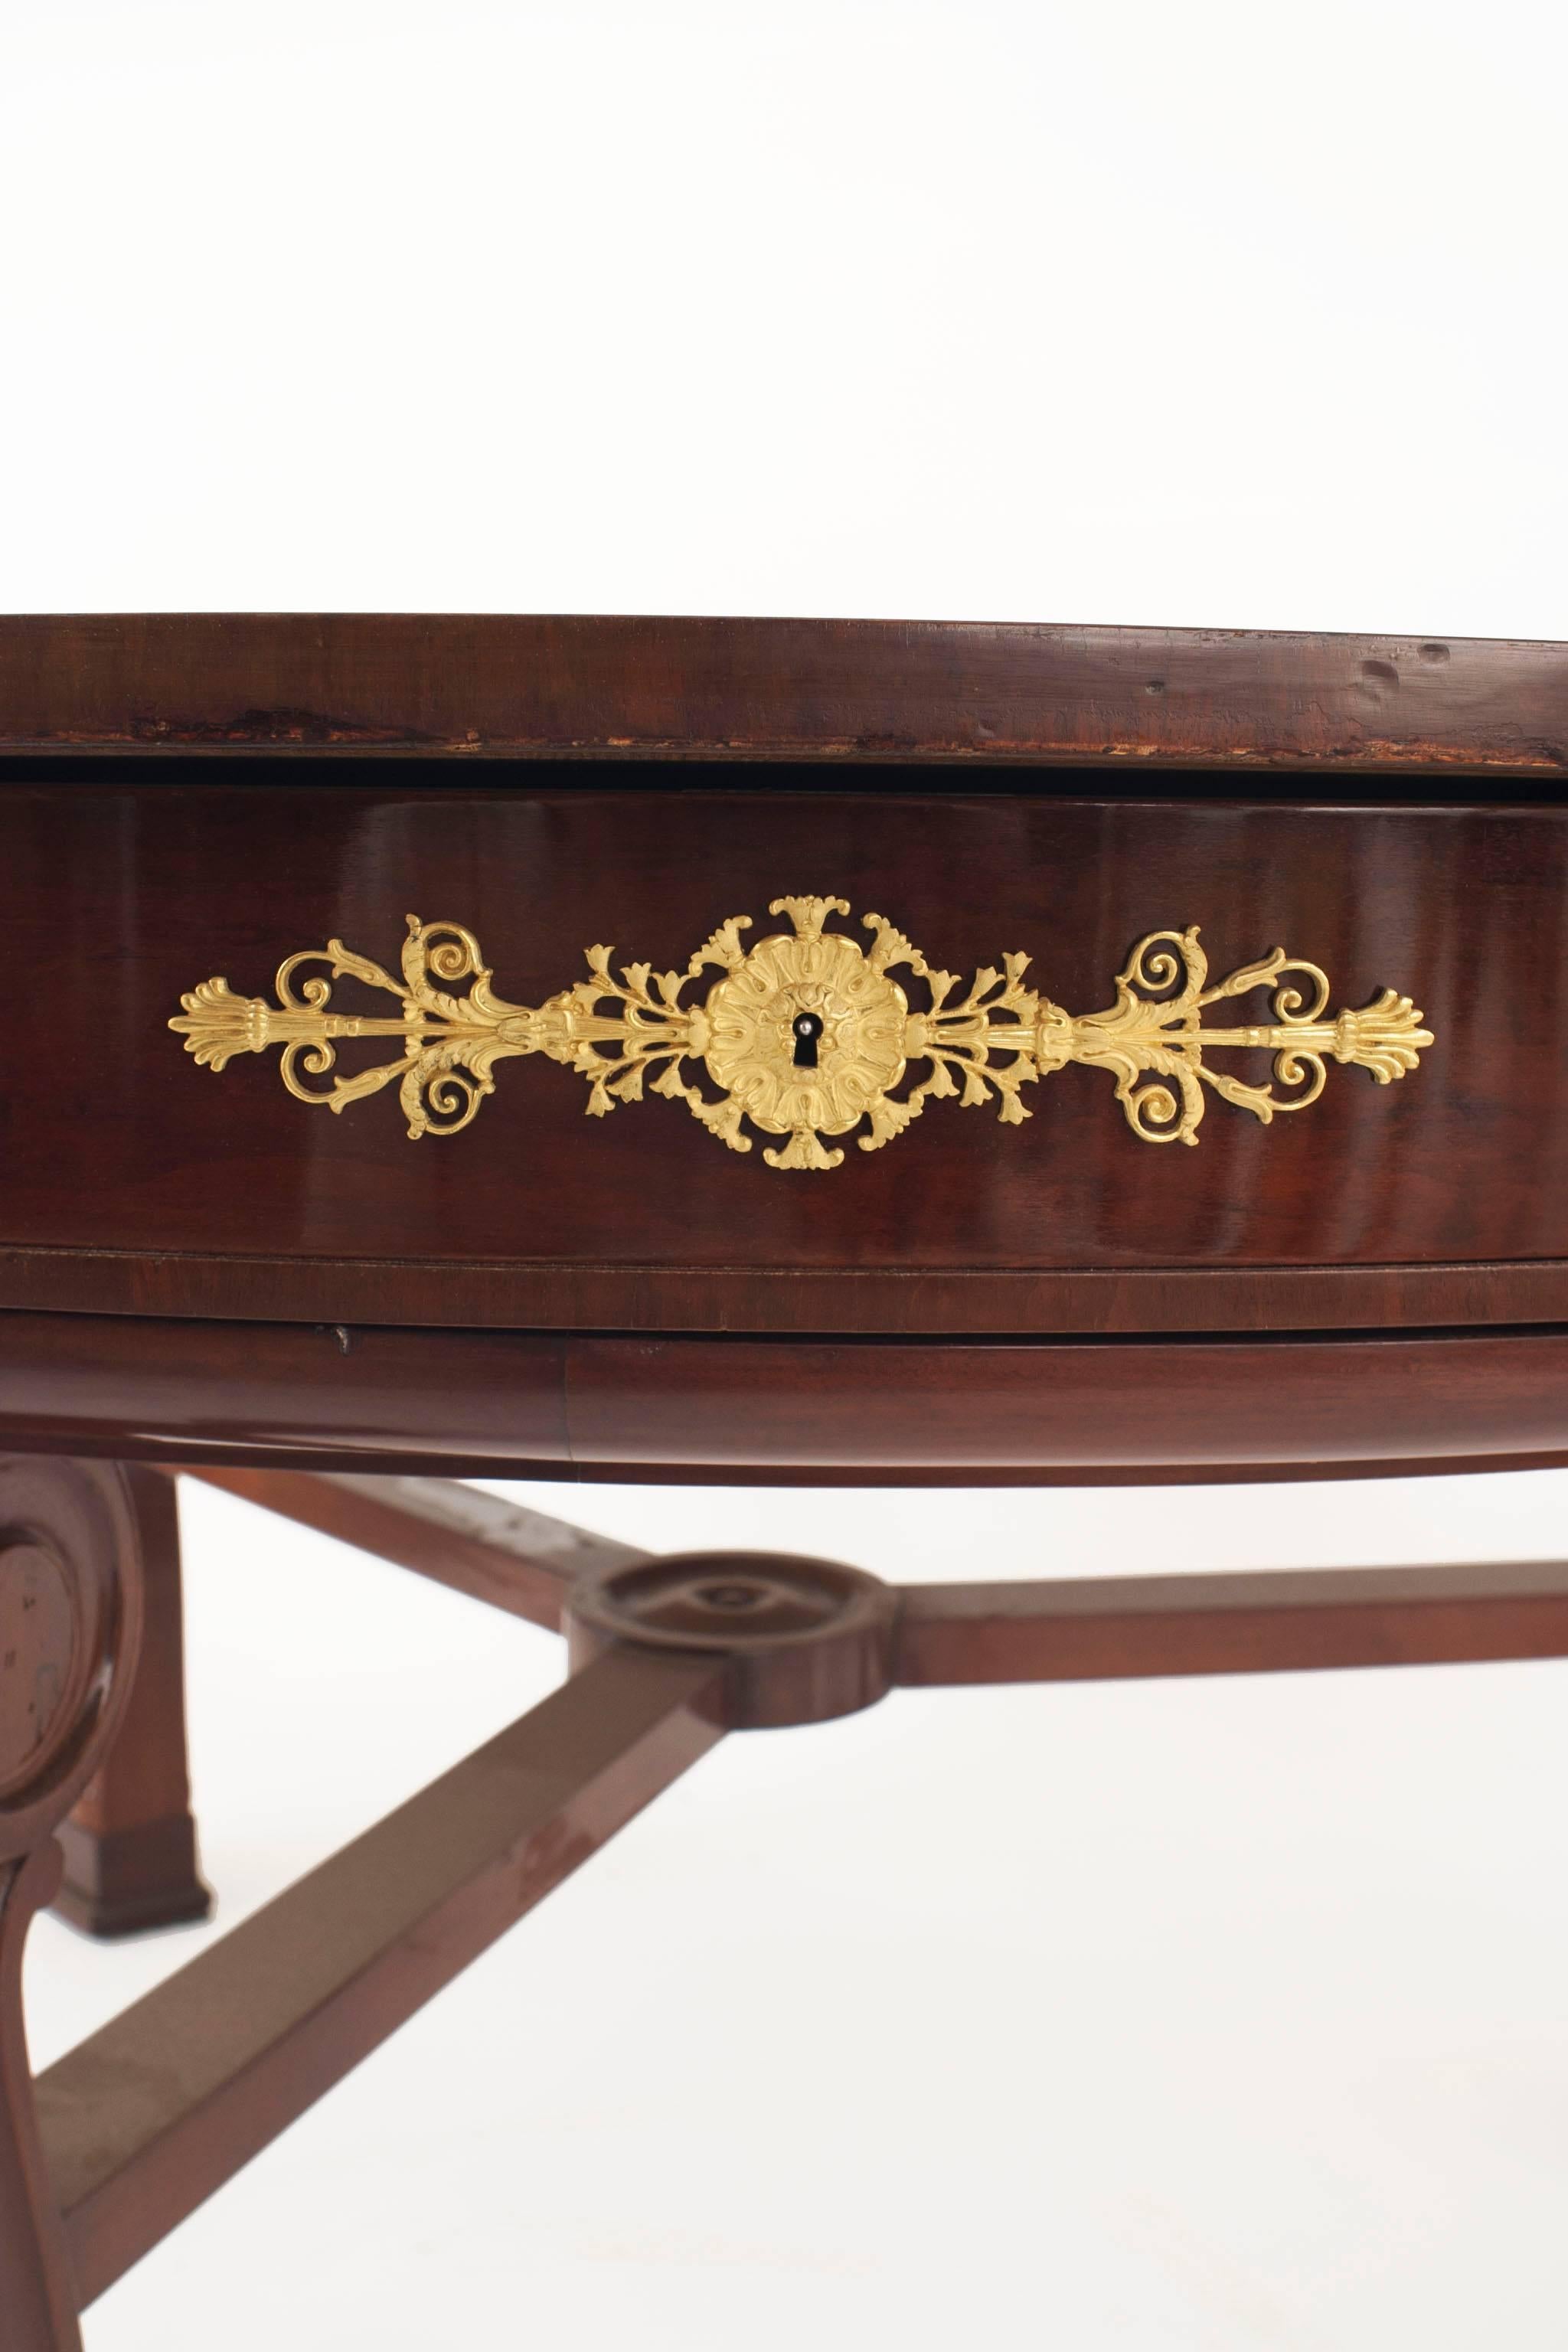 French Empire mahogany & gilt bronze trim round center table on 3 legs with a revolving inset brown leather top and pearl medallions over 6 drawers with a stretcher (stamped: POTHEAU).
